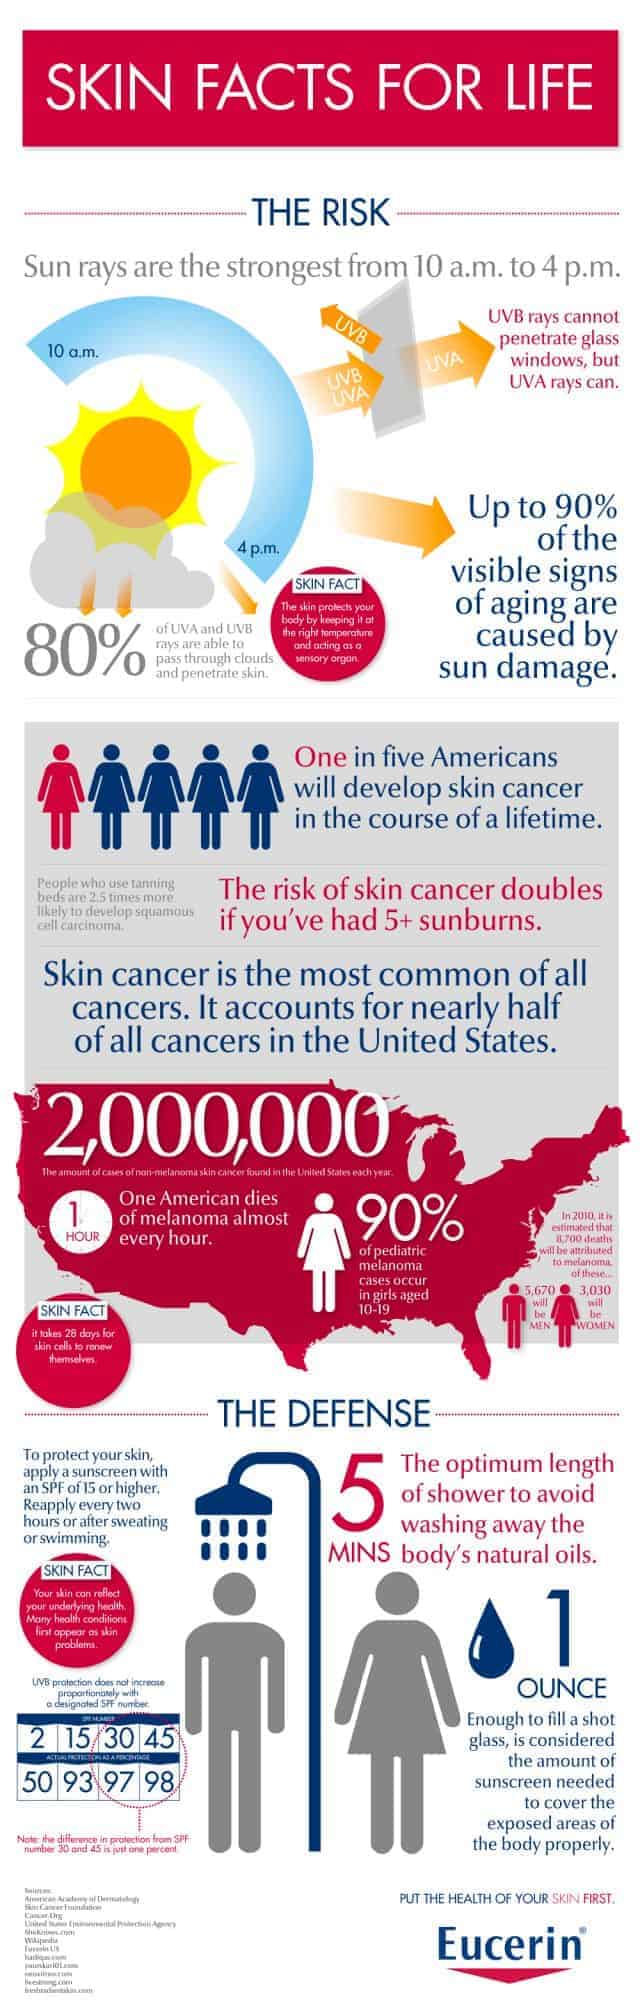 Skin Facts For Life